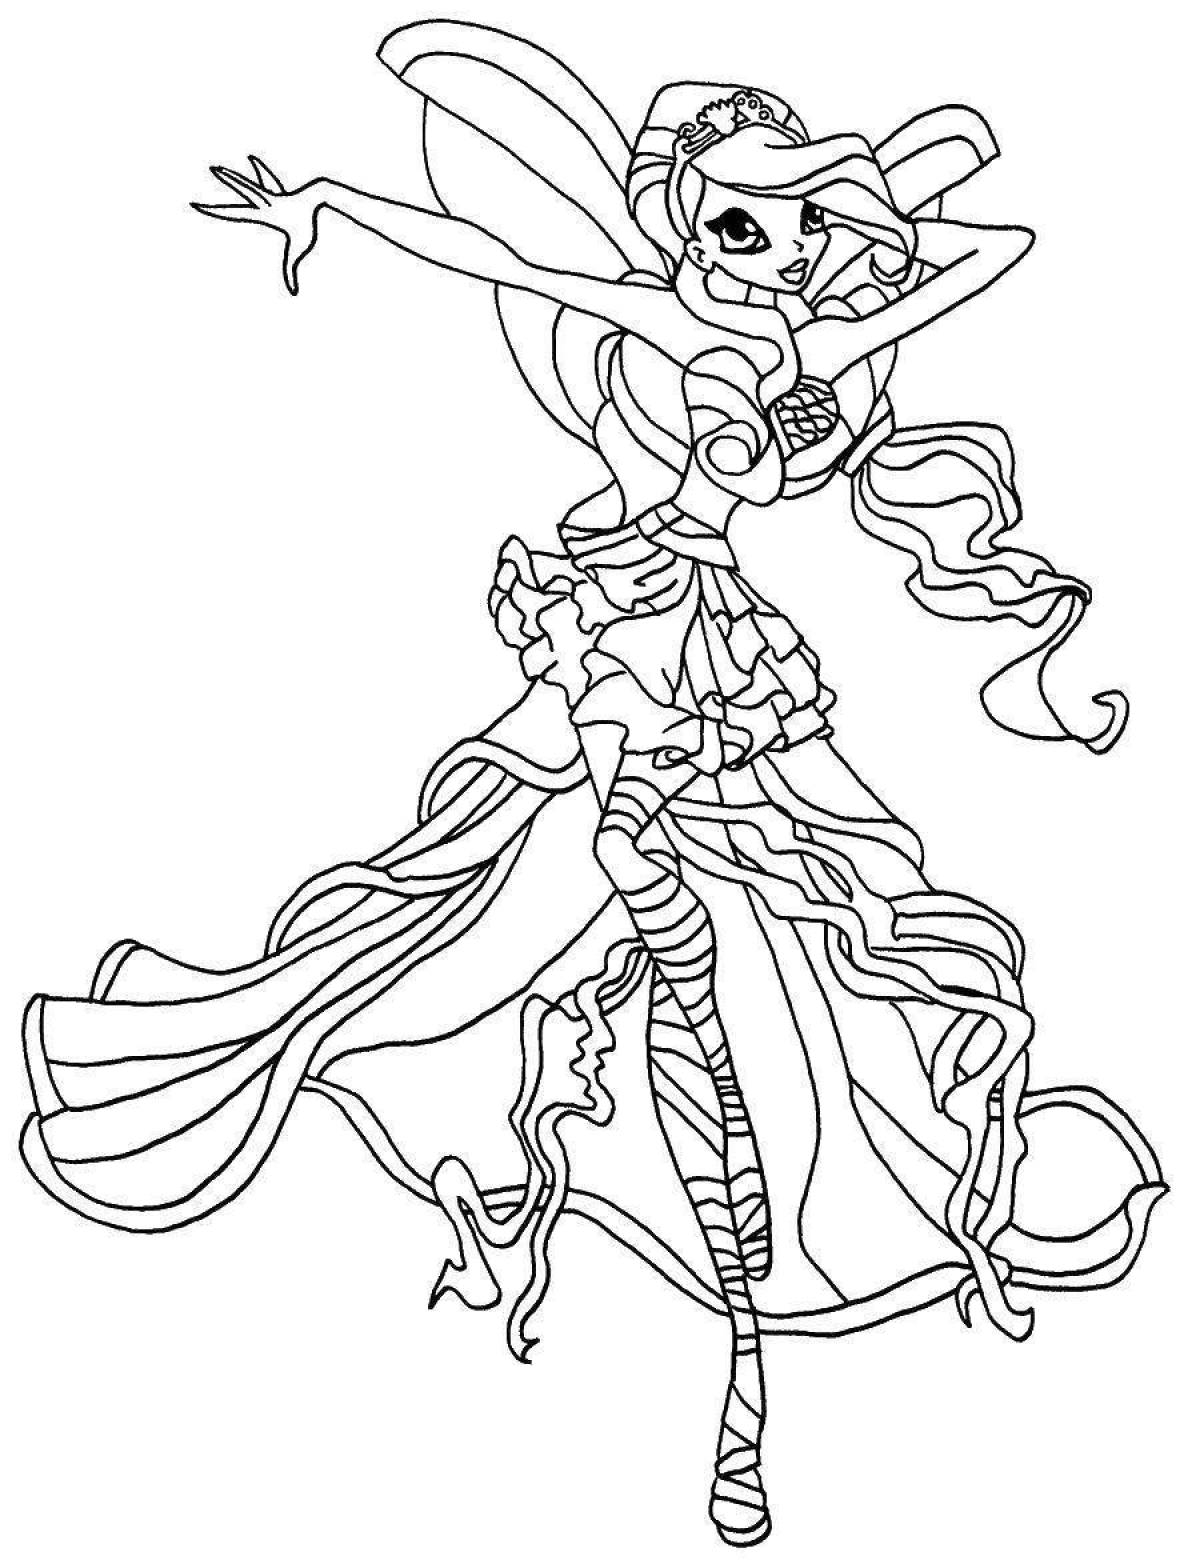 Winx bloom harmonics awesome coloring book